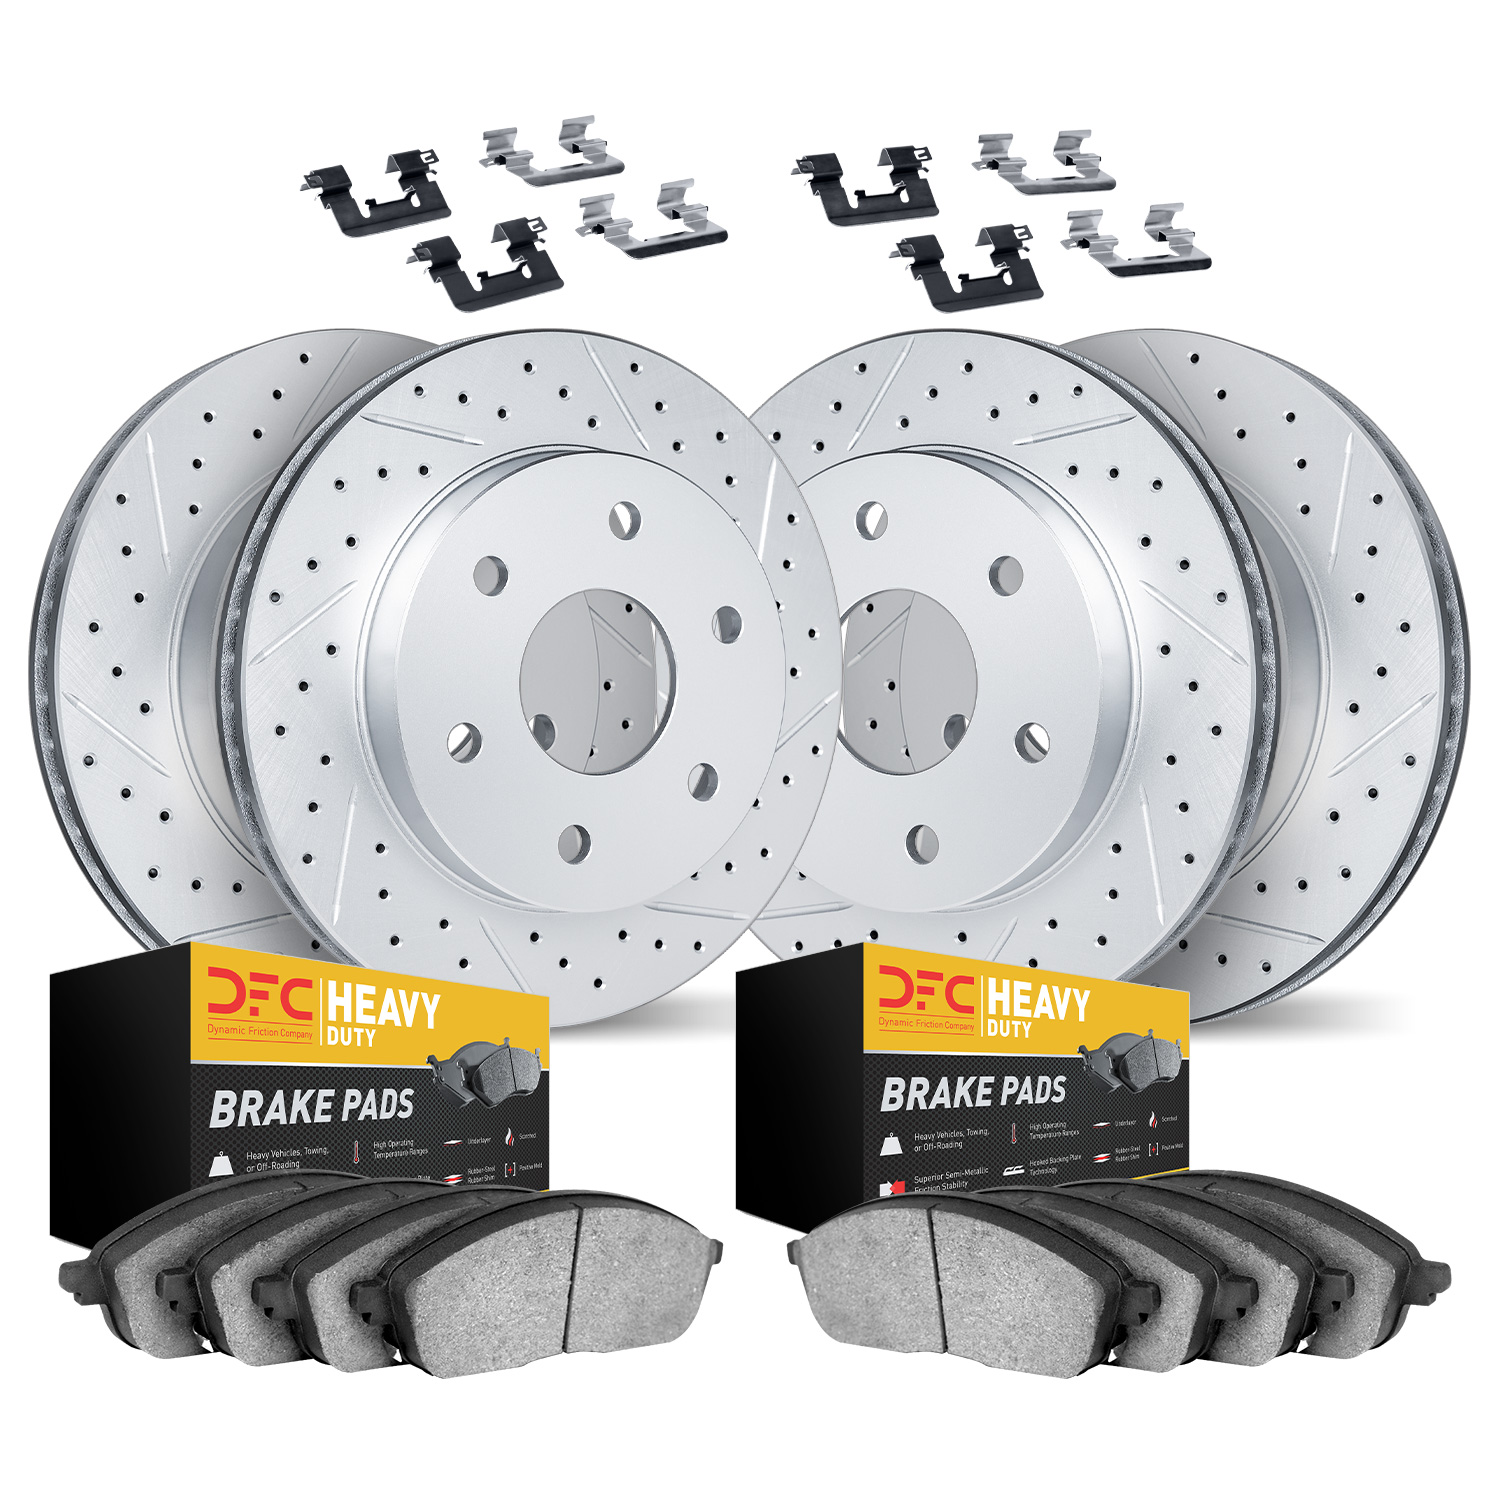 2214-99090 Geoperformance Drilled/Slotted Rotors w/Heavy-Duty Pads Kit & Hardware, 2010-2017 Ford/Lincoln/Mercury/Mazda, Positio